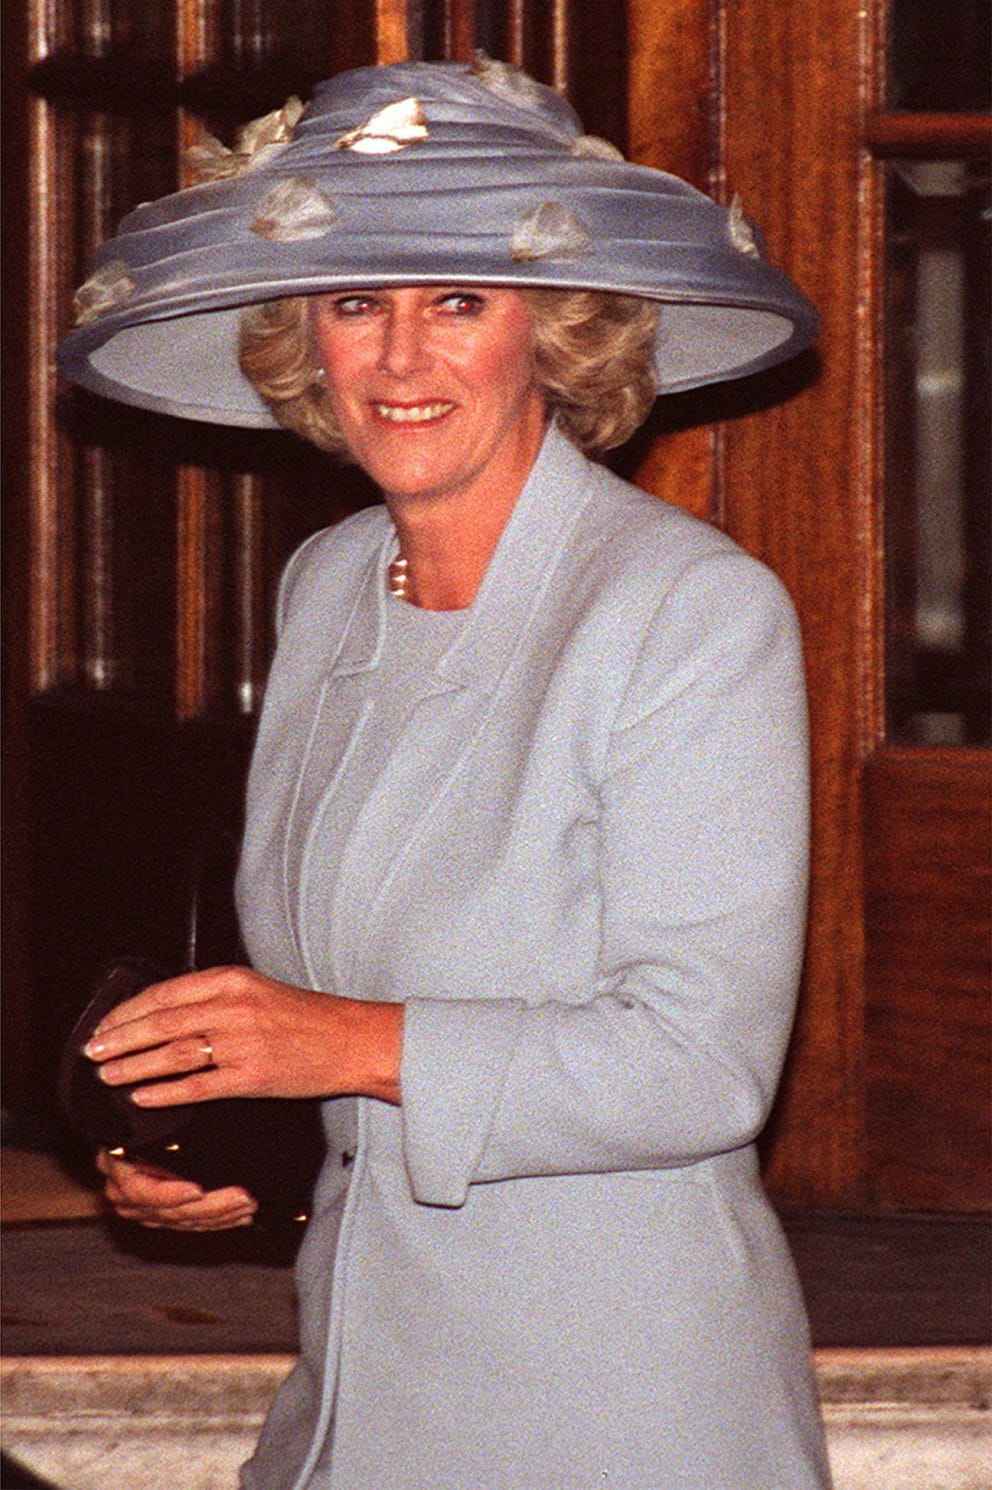 Camilla at The Ritz Hotel in London in 1998